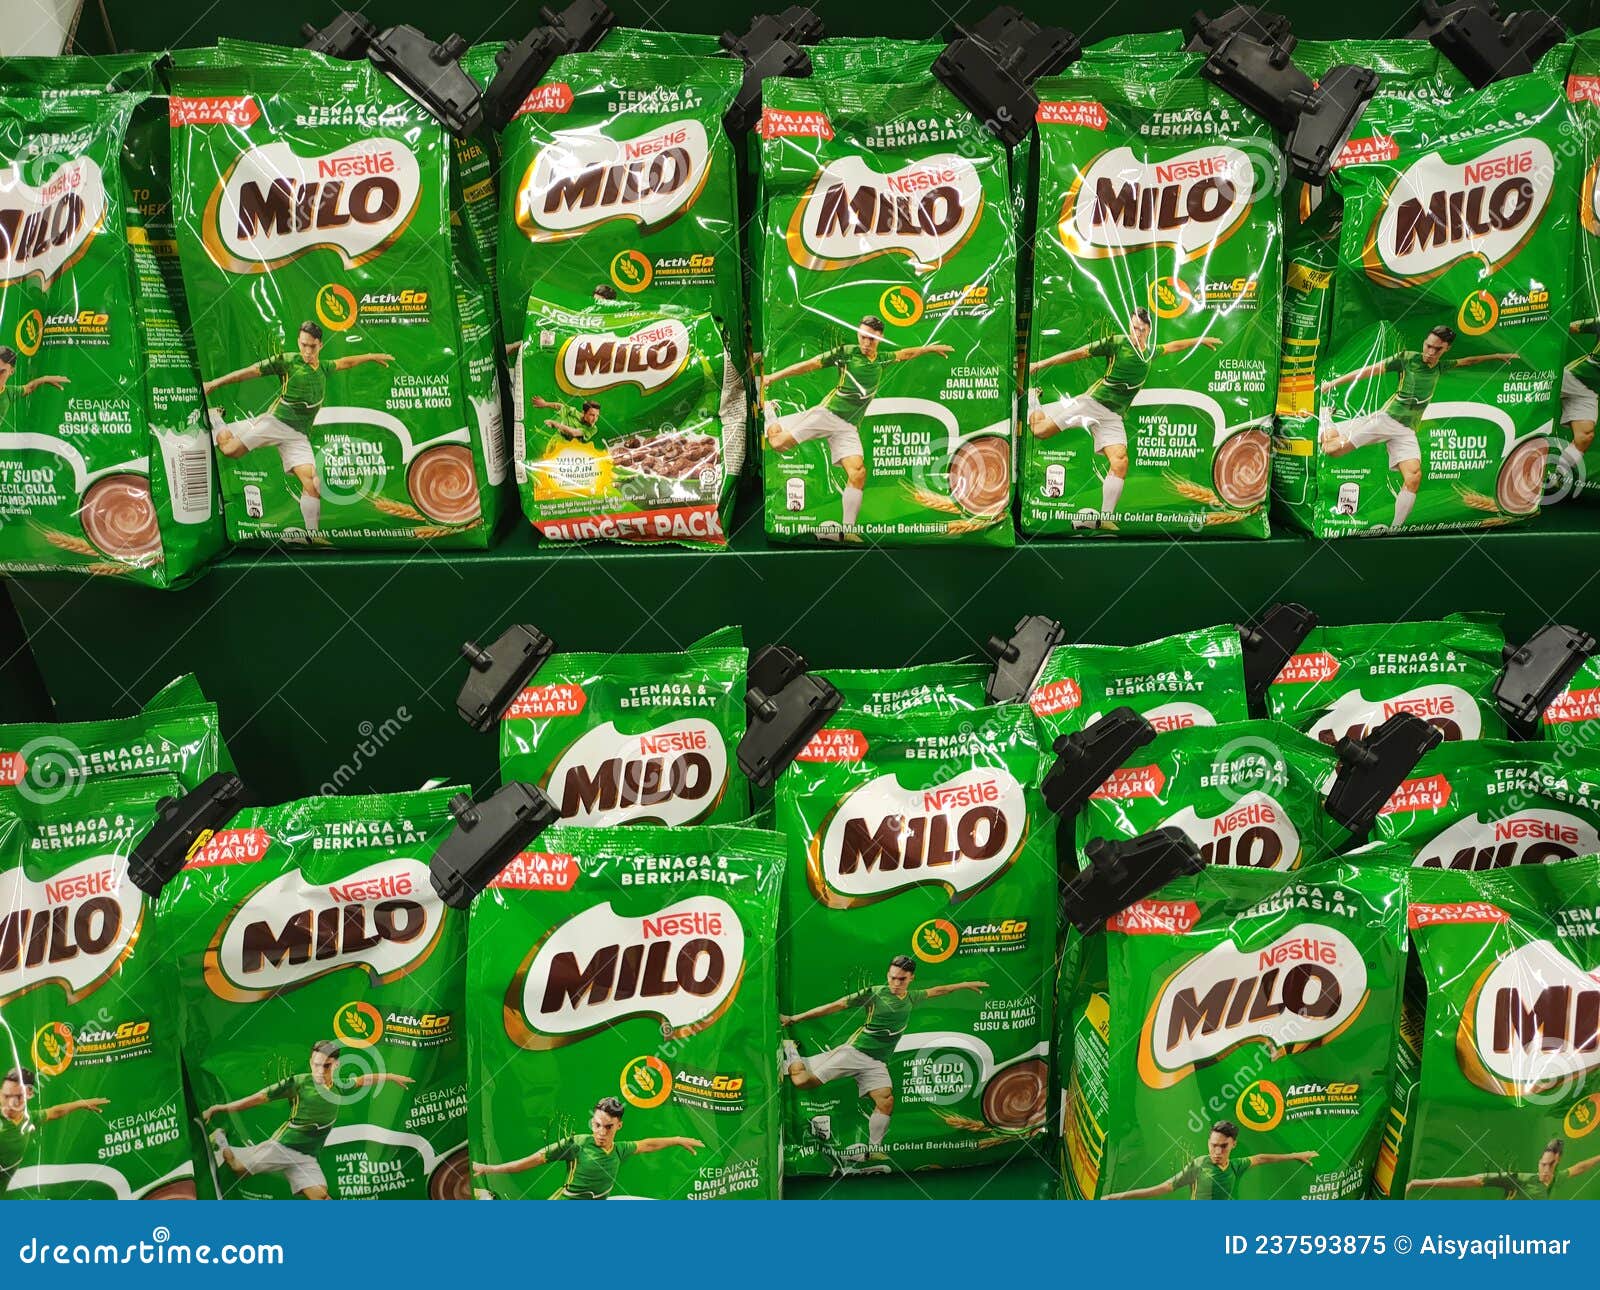 Is milo from malaysia